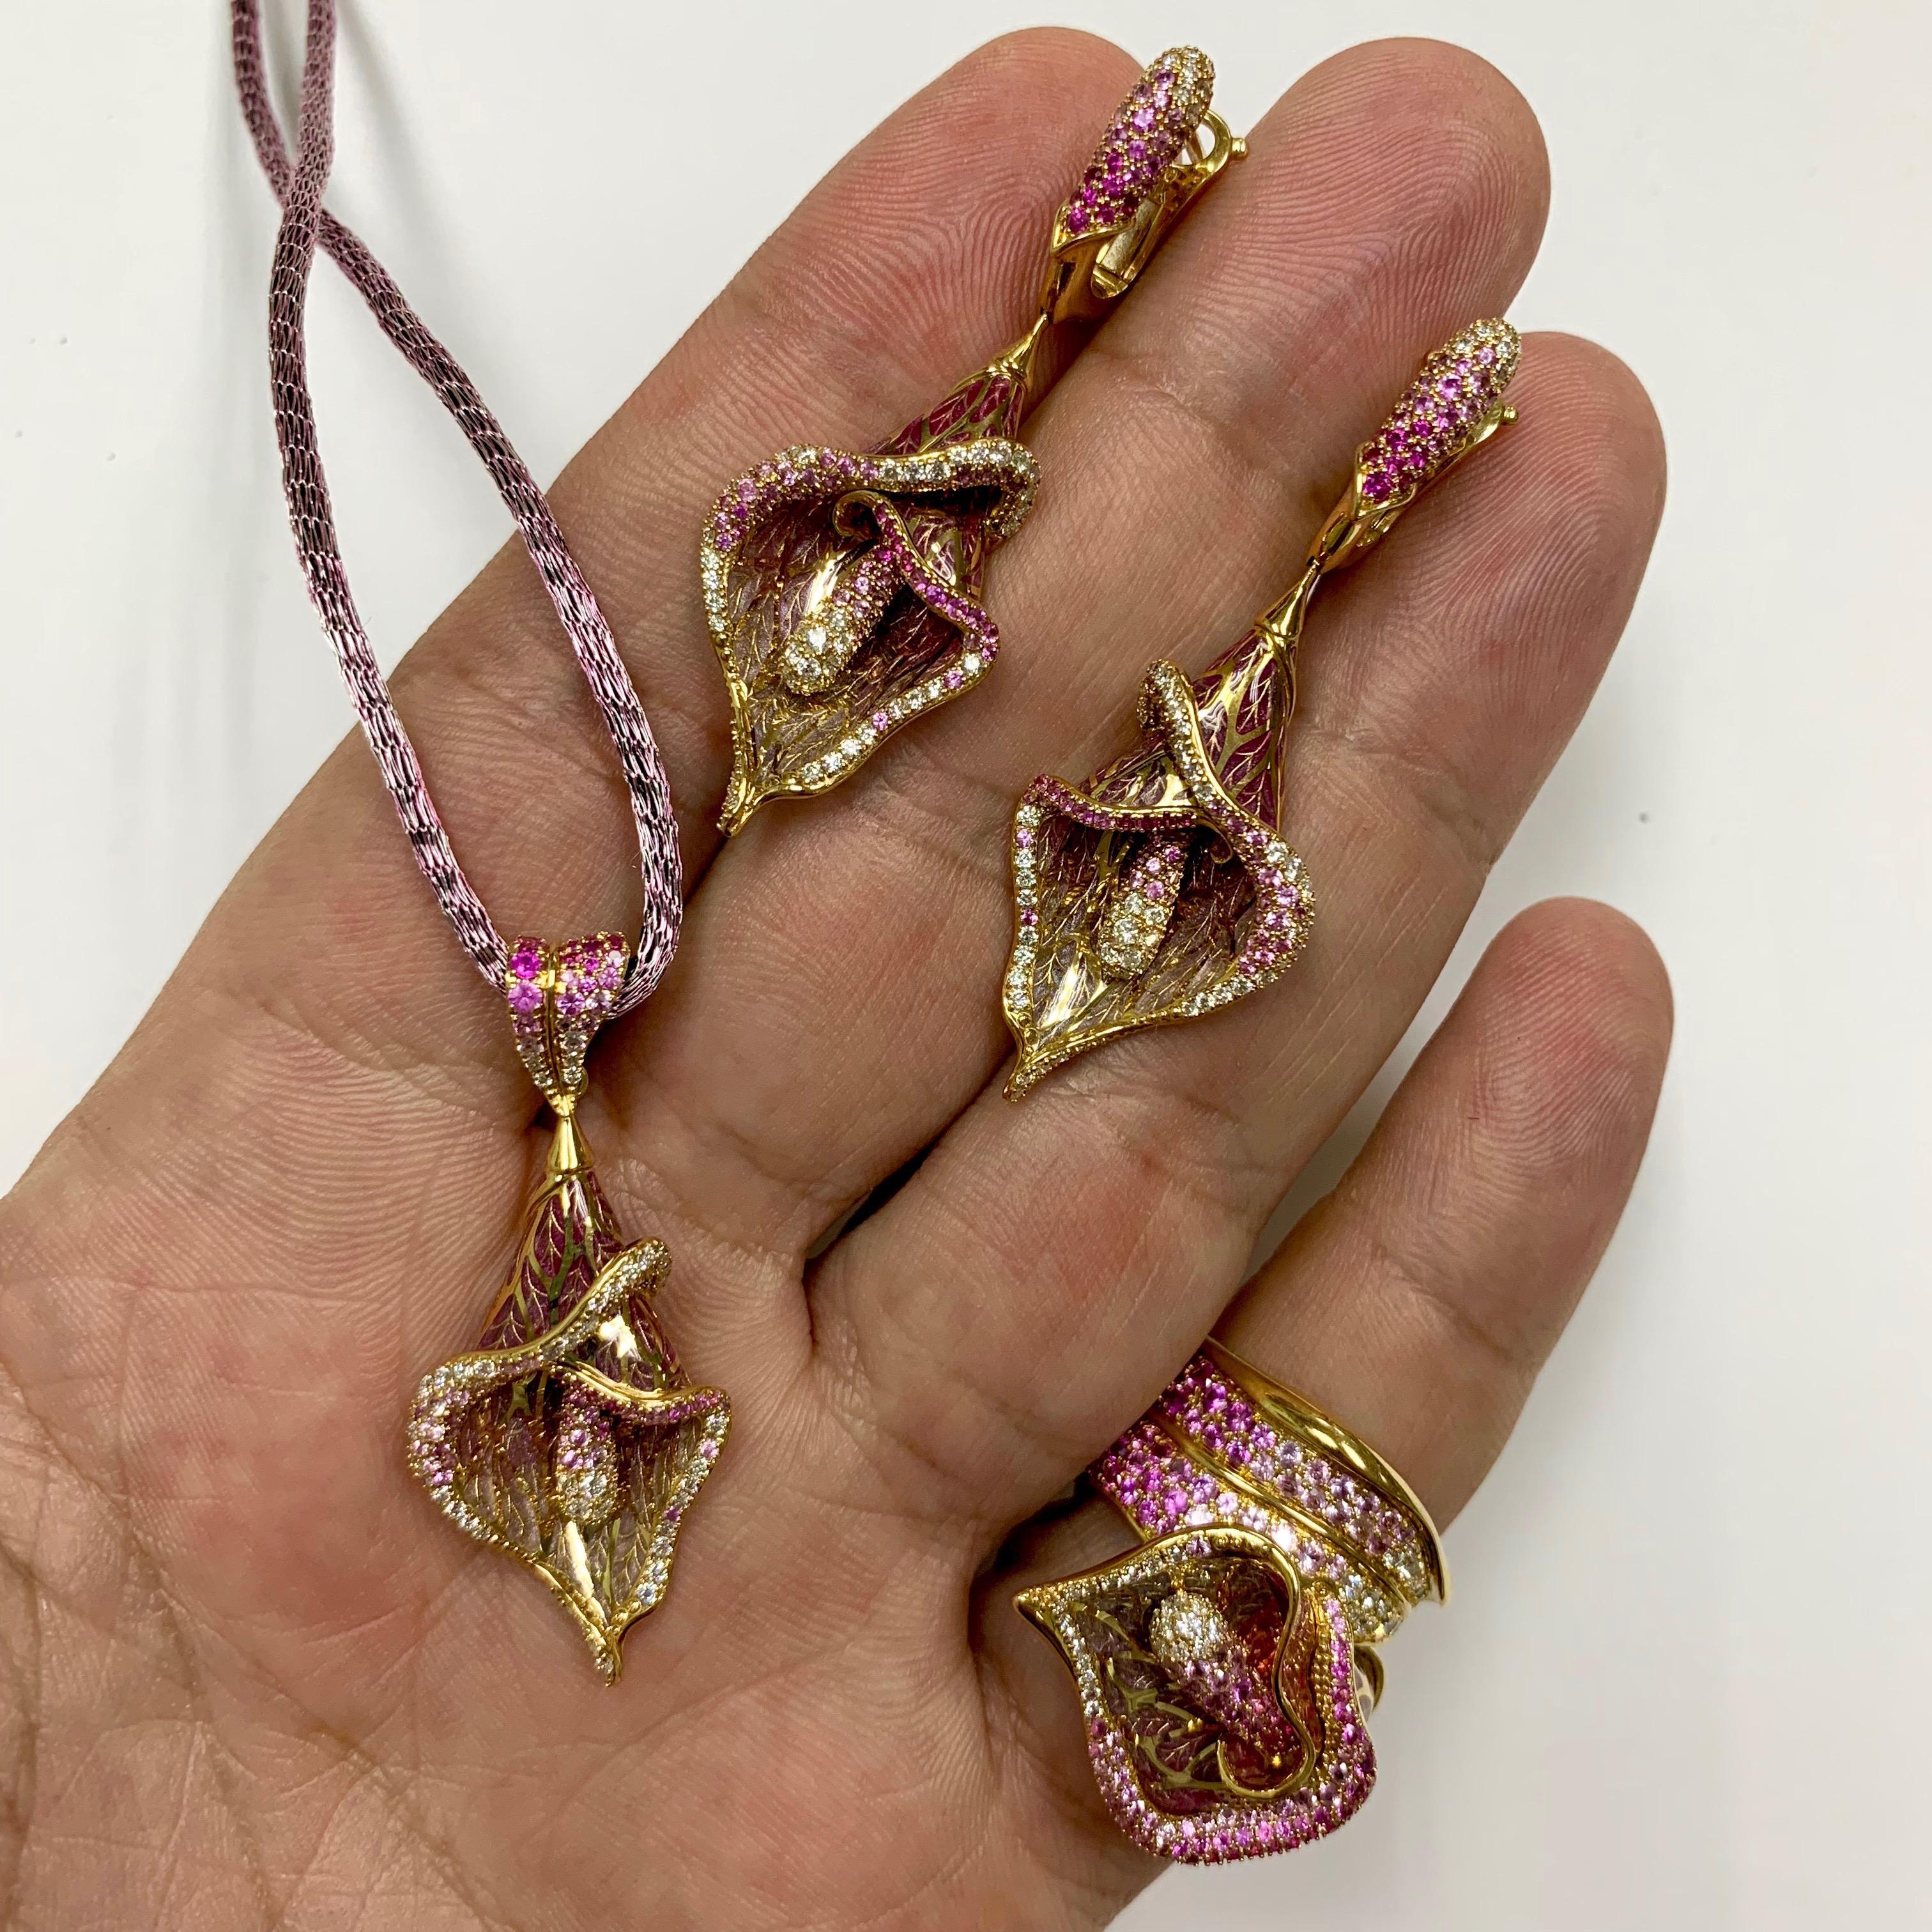 Pink Sapphire Diamonds Colored Enamel 18 Karat Yellow Gold Calla Lilly Suite
There is a legend that one girl wanted to marry the cruel leader of the tribe, she decided to throw herself into the fire from misfortune, but the gods saved her and turned